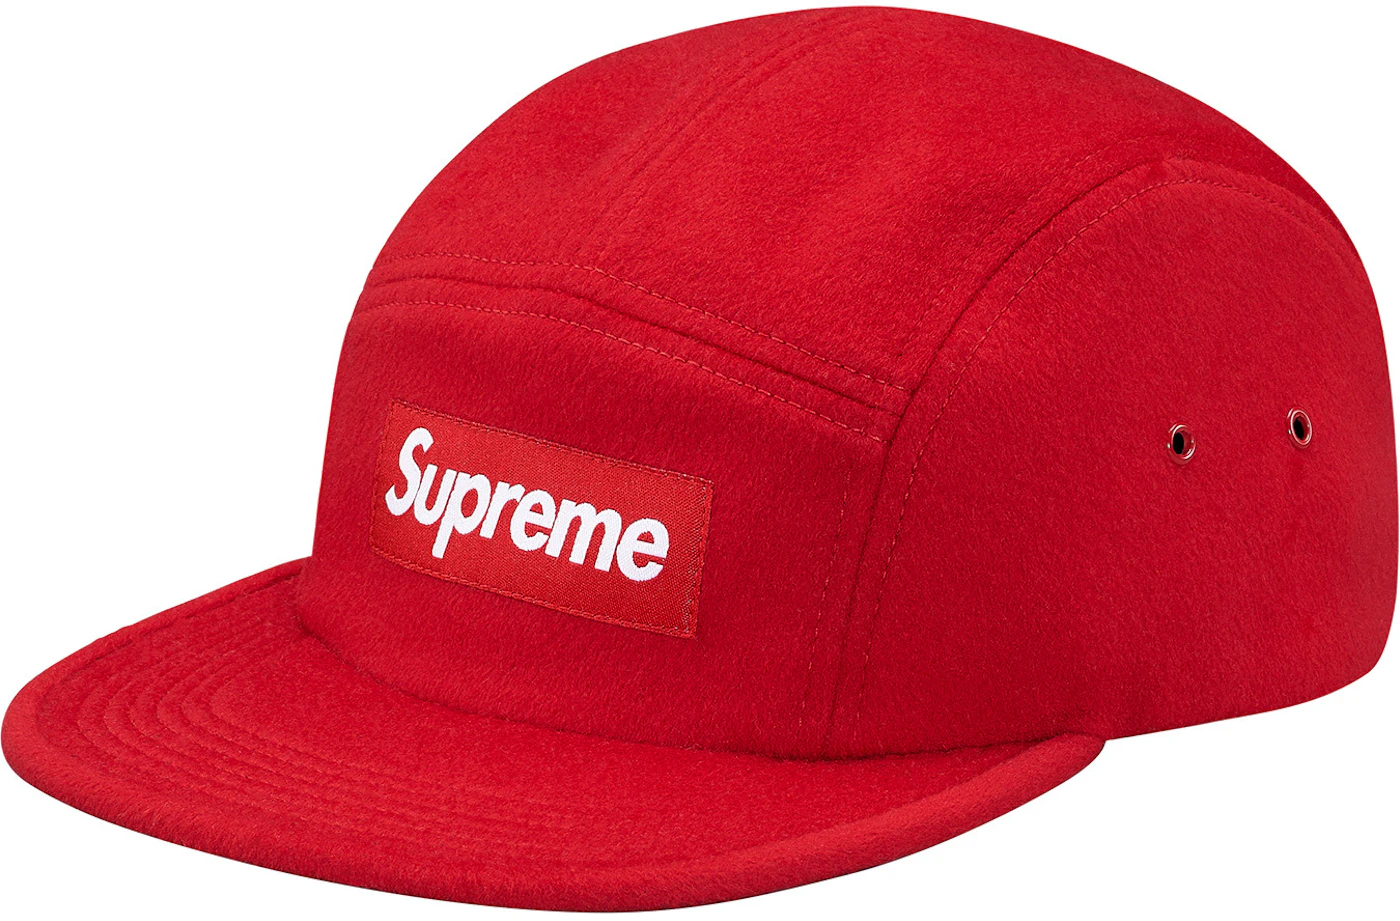 Buy Supreme Wool Camp Cap 'Red' - FW21H121 RED